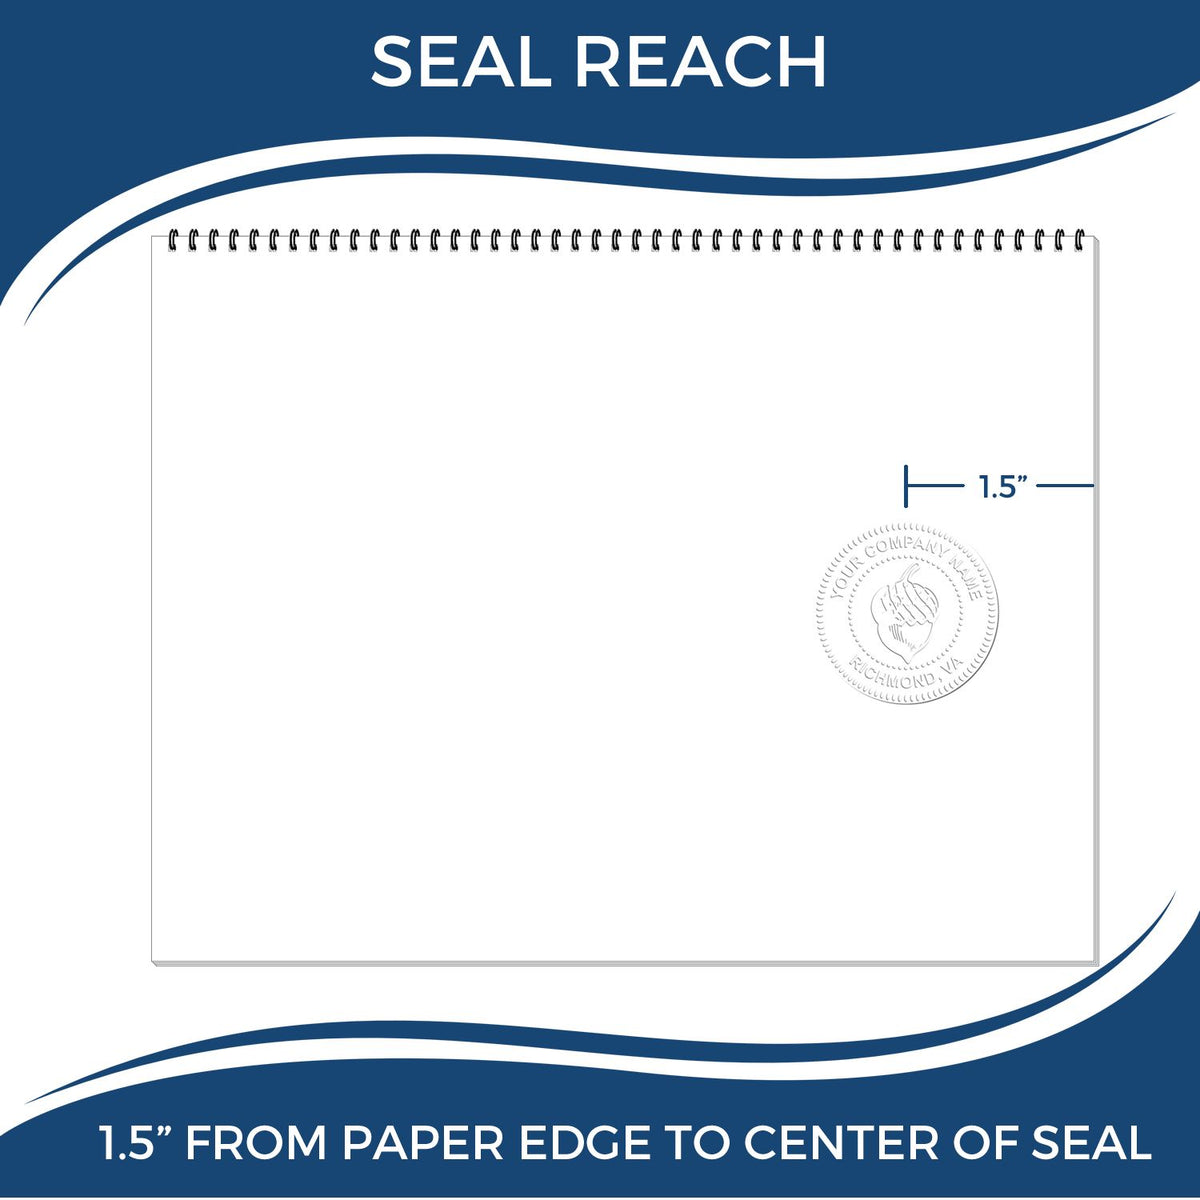 An infographic showing the seal reach which is represented by a ruler and a miniature seal image of the Gift Minnesota Engineer Seal